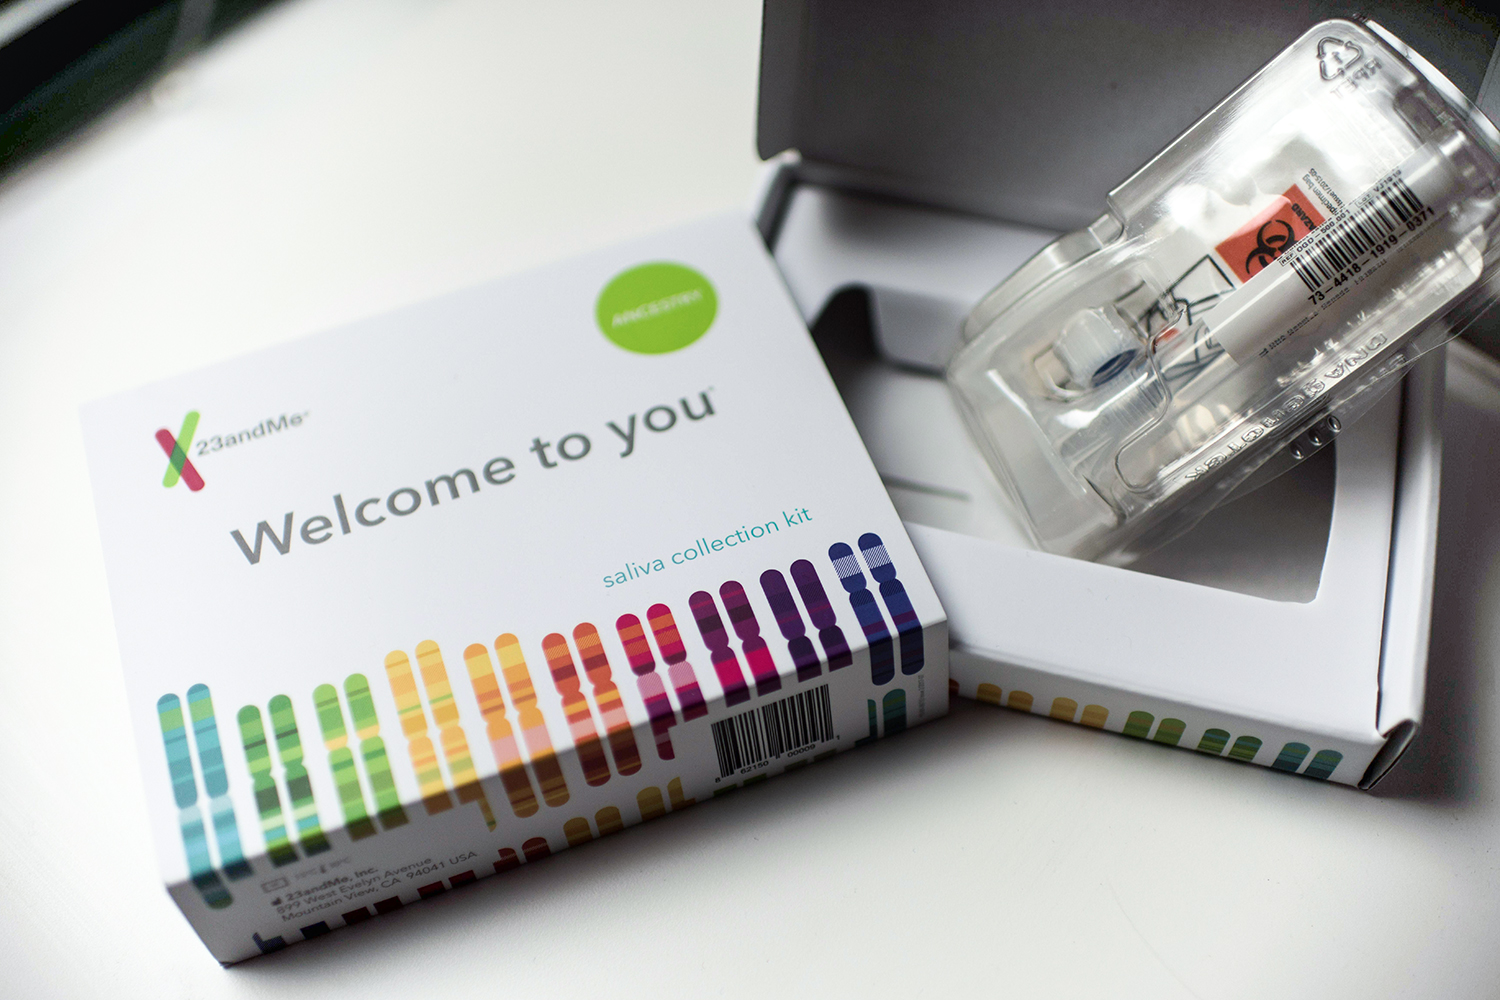 23andMe Prime Day Deal 2022: Cheapest Price Today